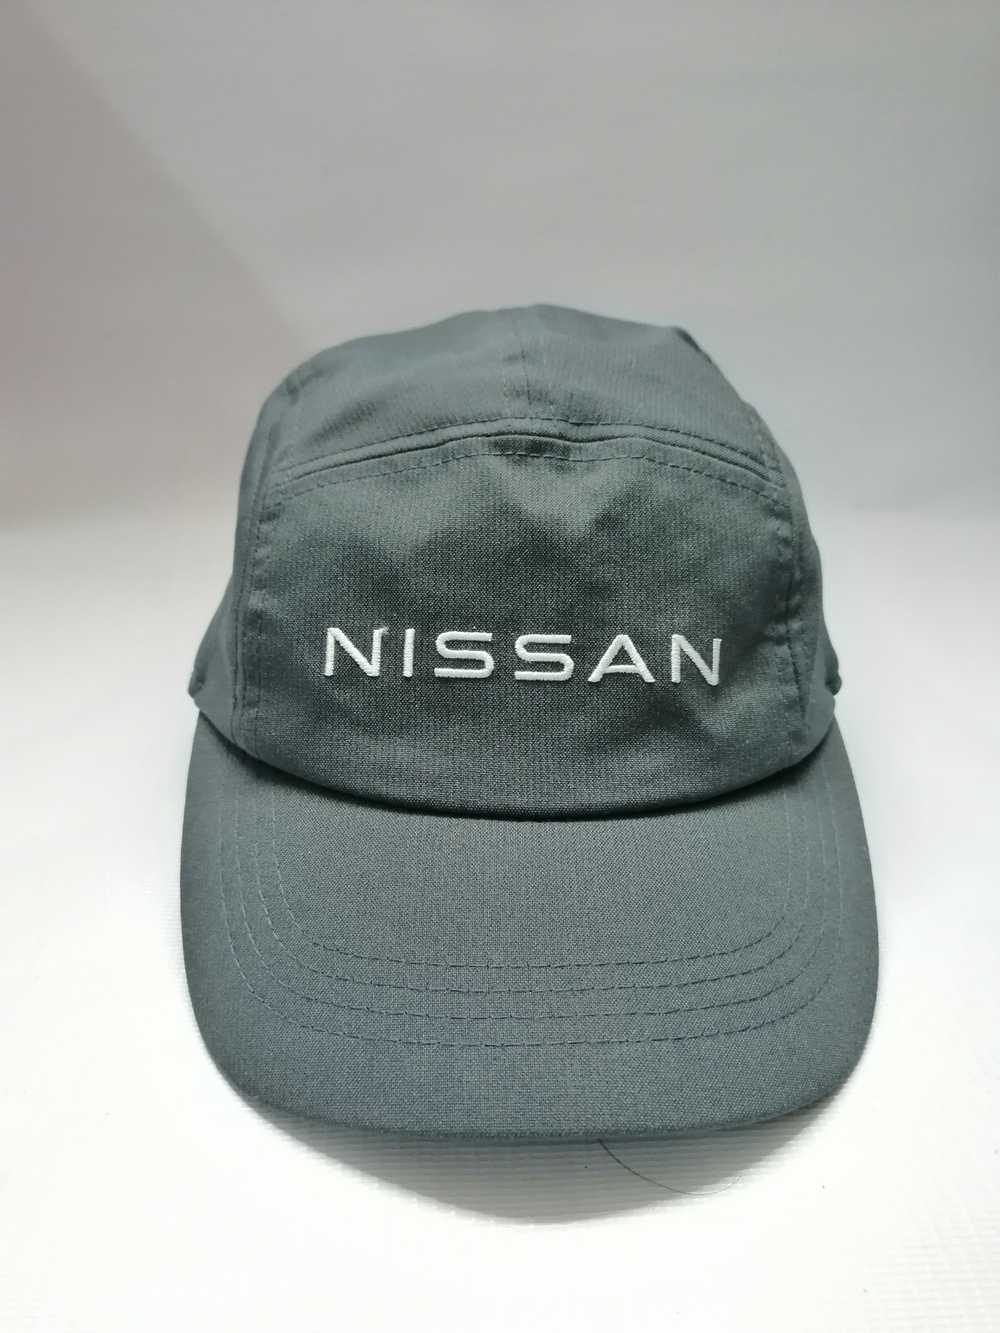 Gear For Sports × Racing × Retro Hat 5 PANEL NISS… - image 1